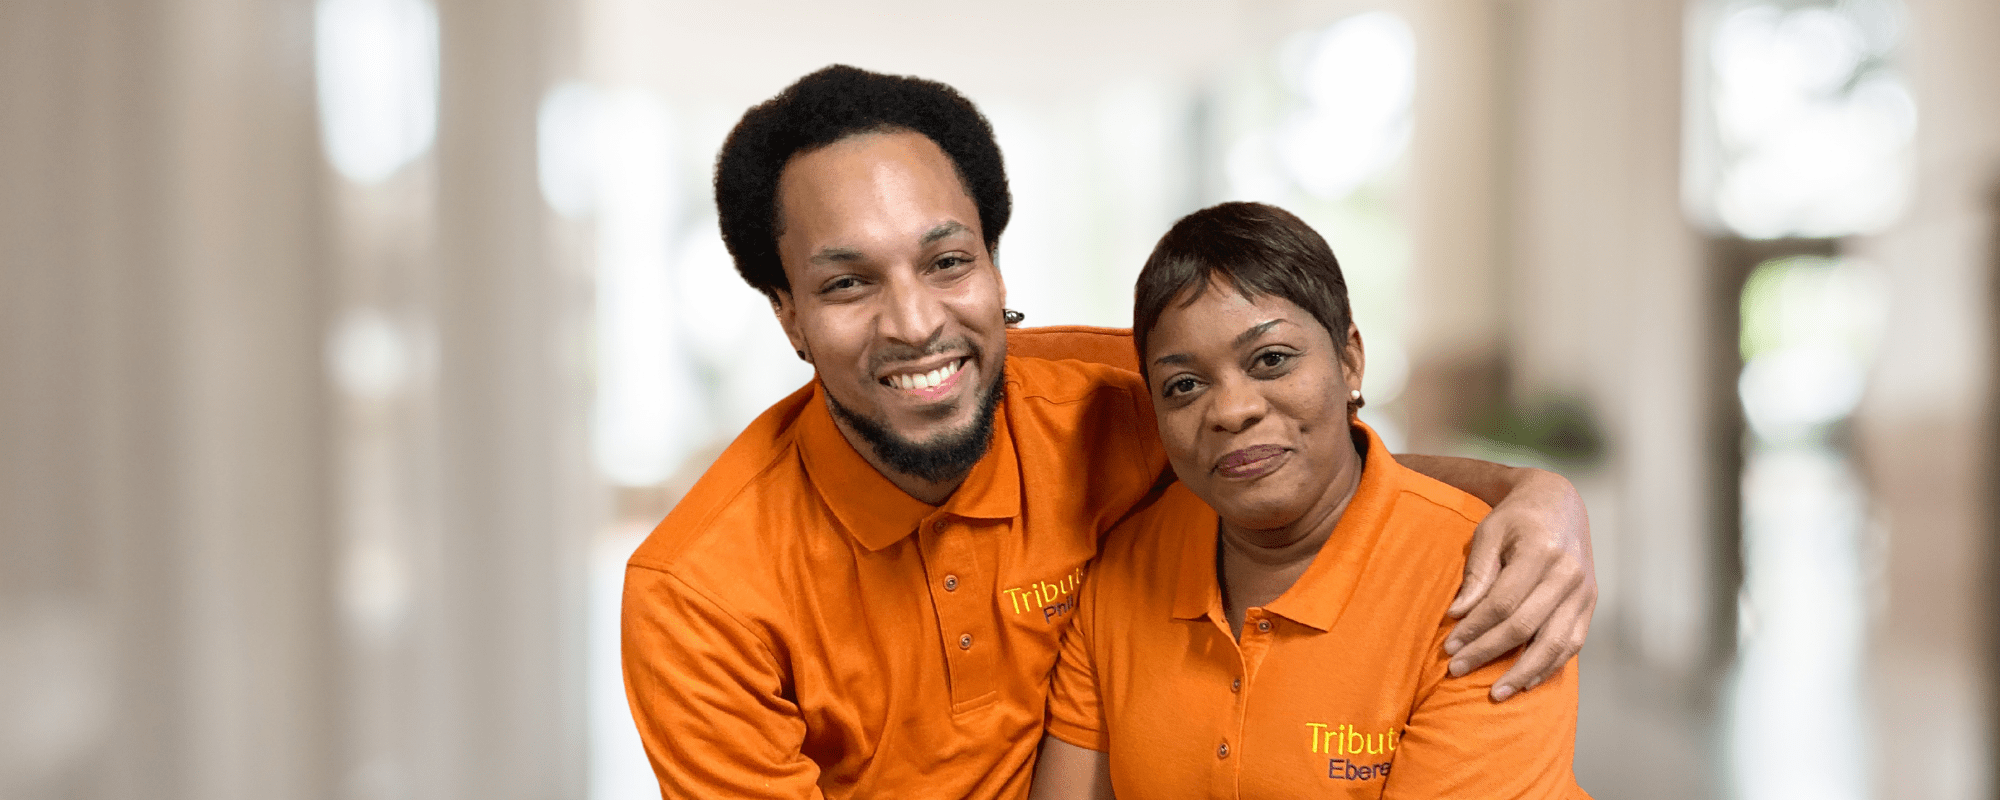 Tribute Caregivers Phil and Ebere smile together